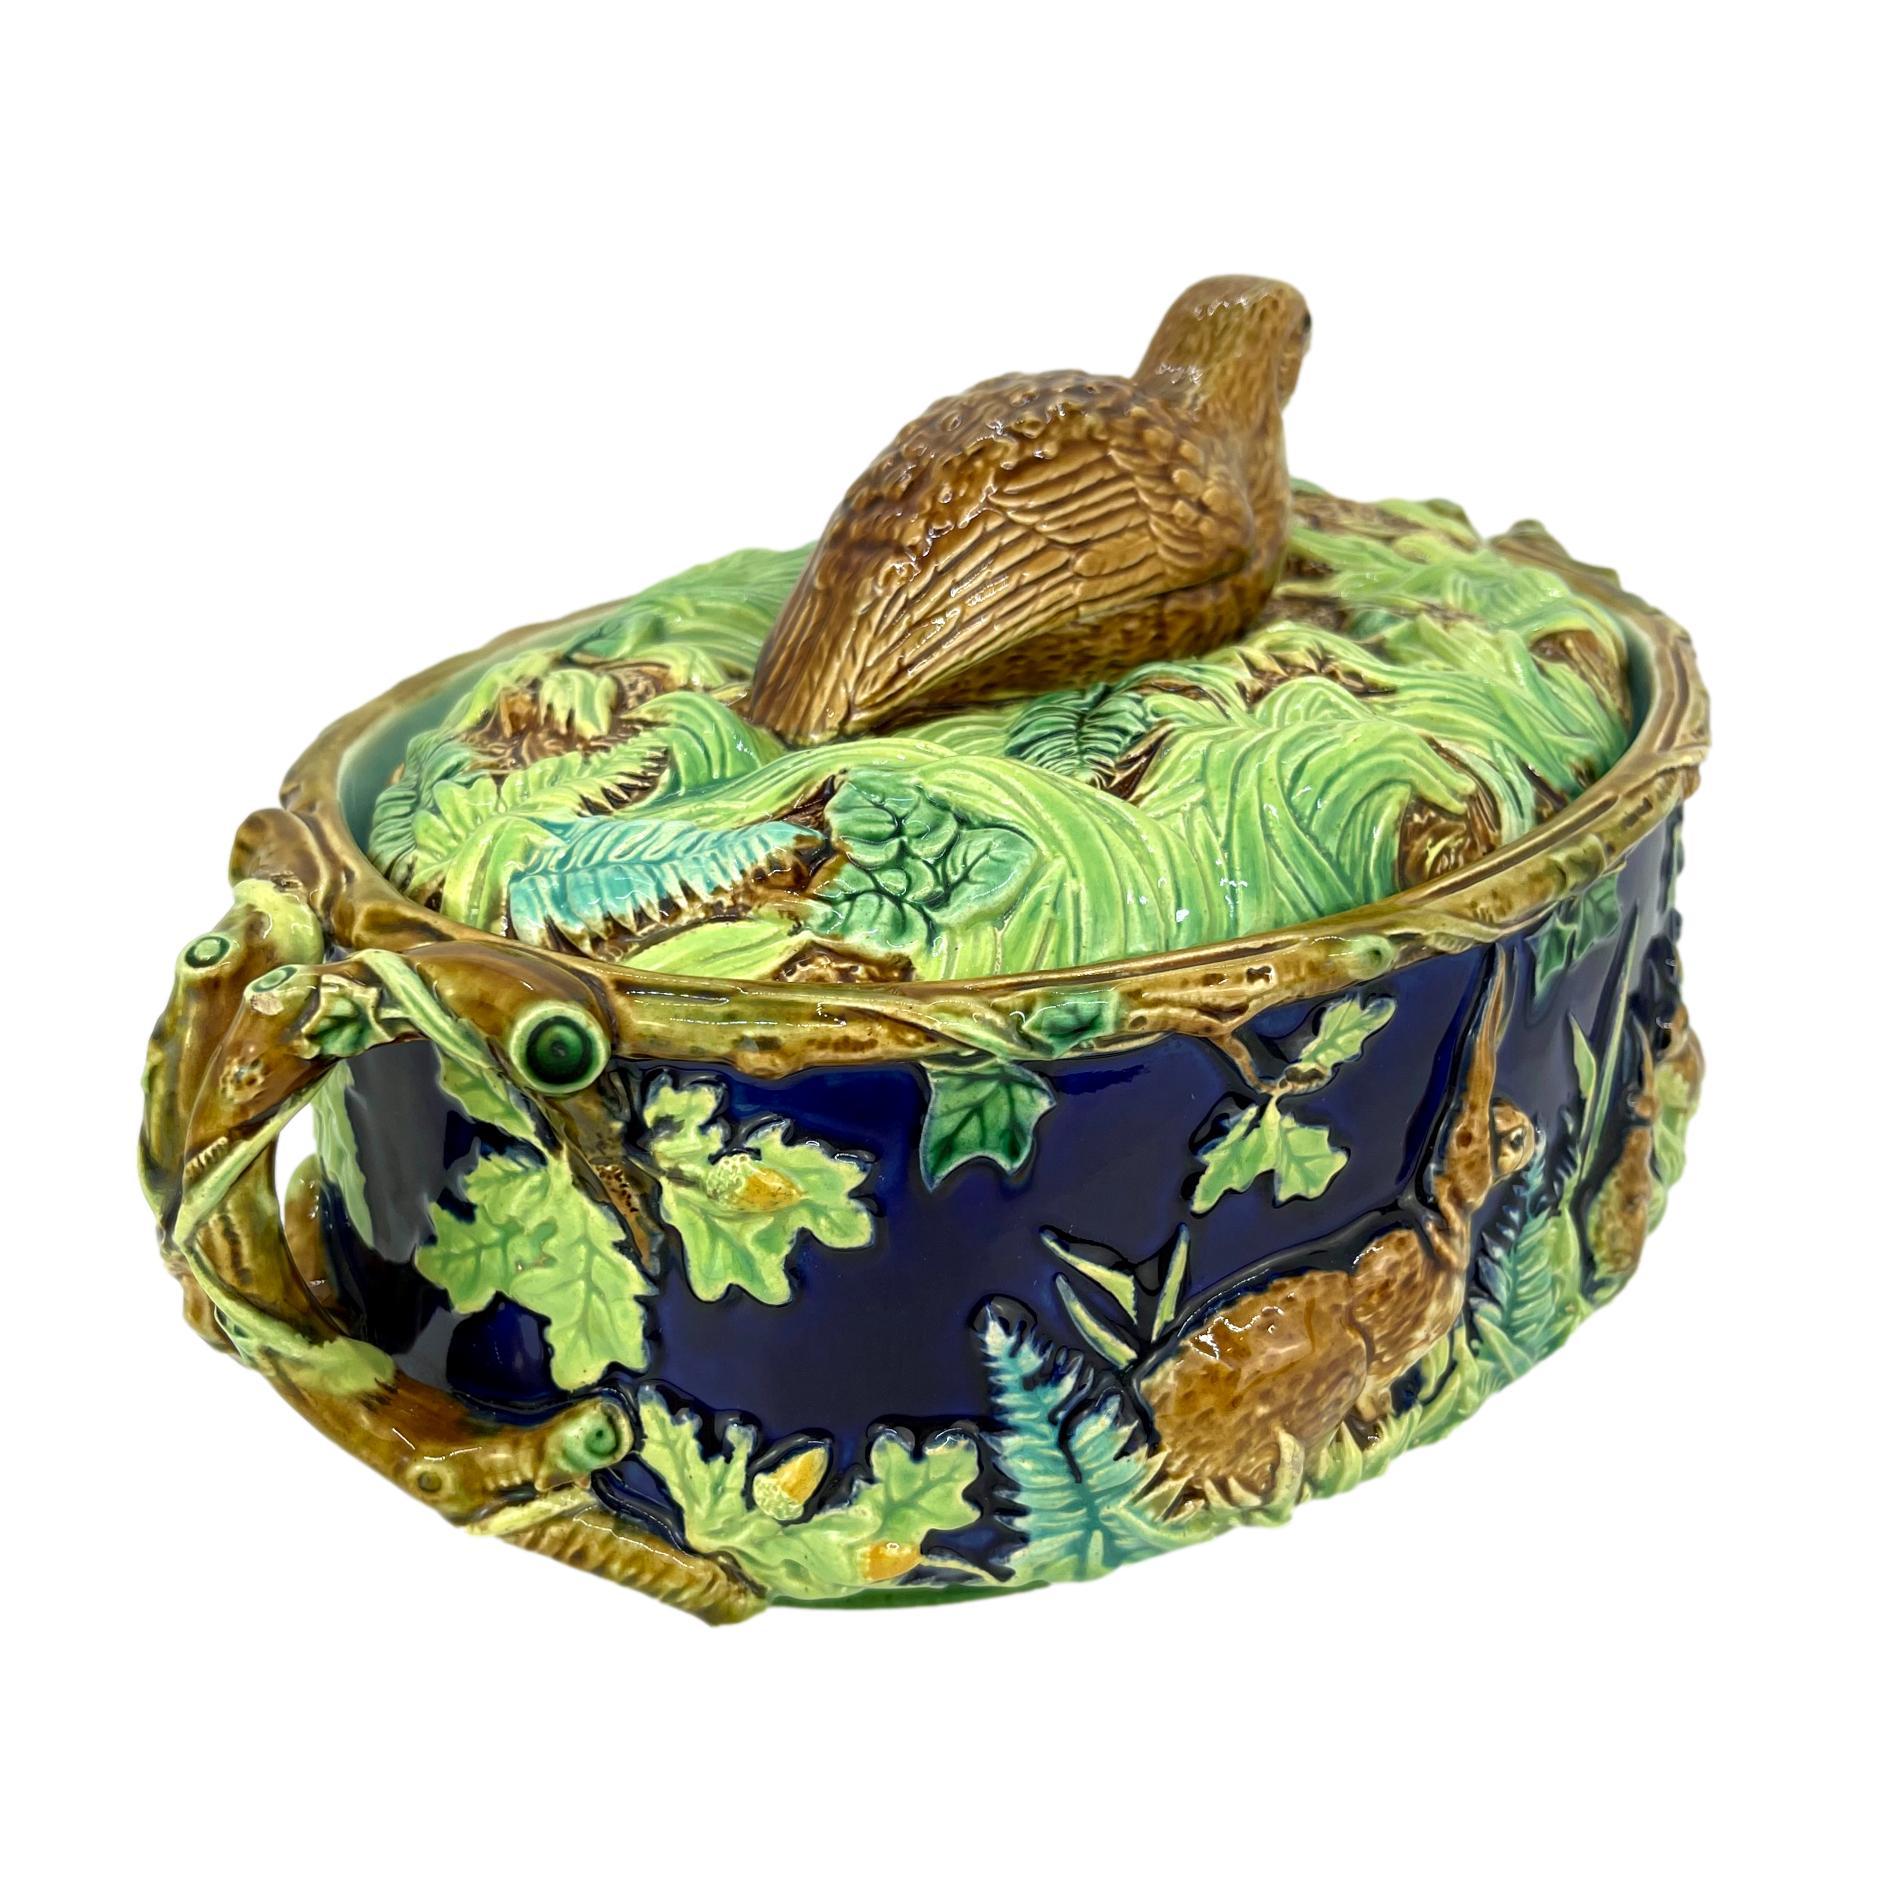 English George Jones Majolica Partridge Tureen with Rabbits and Ferns in Cobalt, 1877